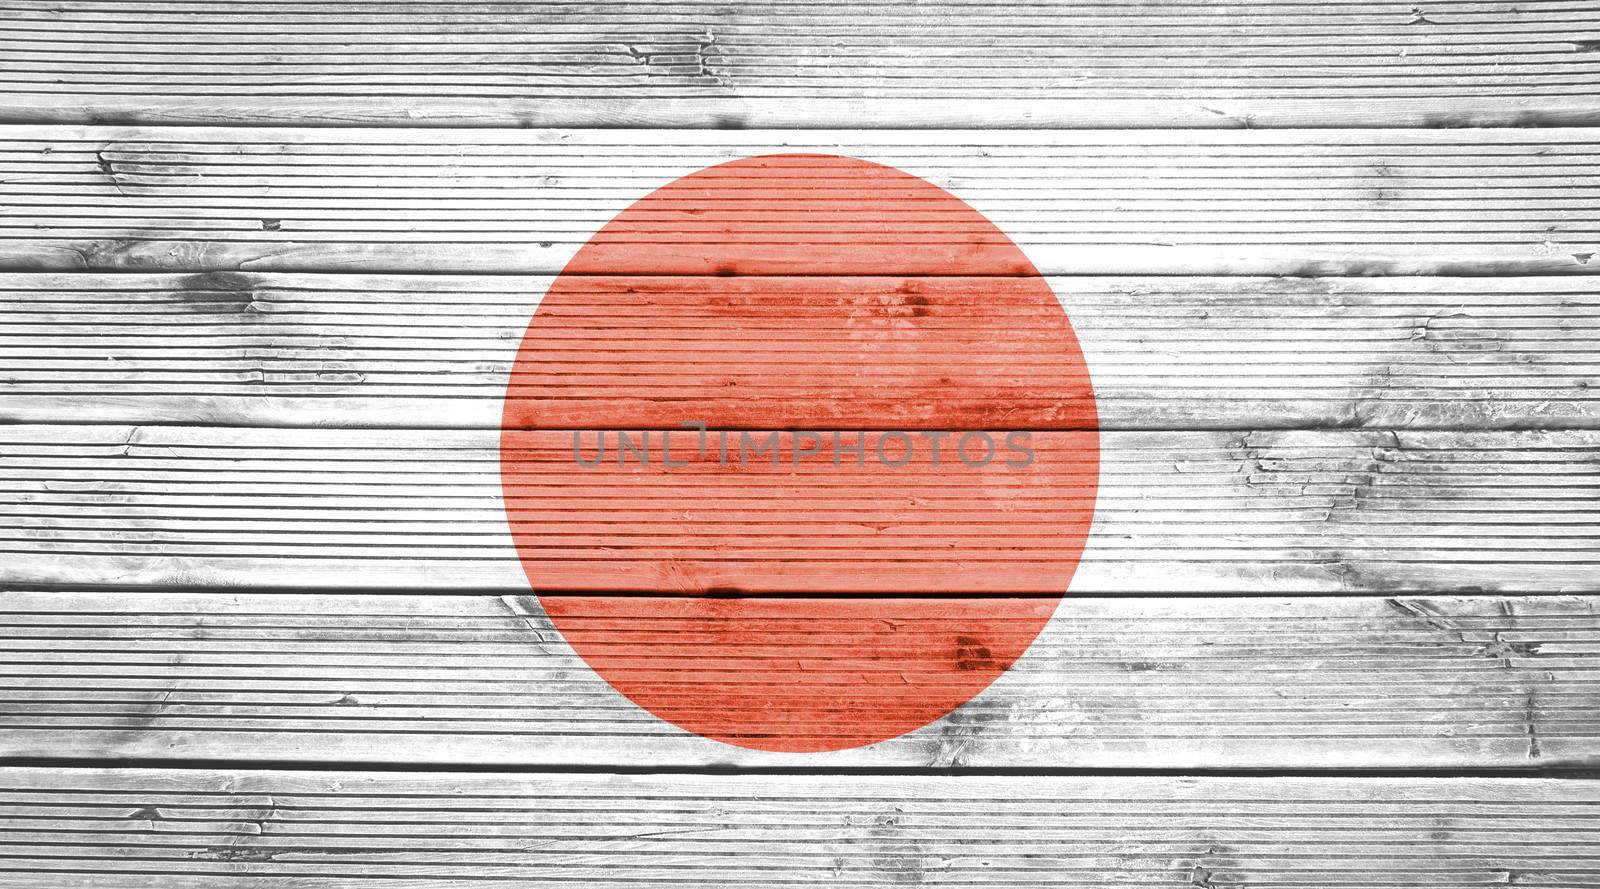 Wood texture background with colors of the flag of Japan by doble.d